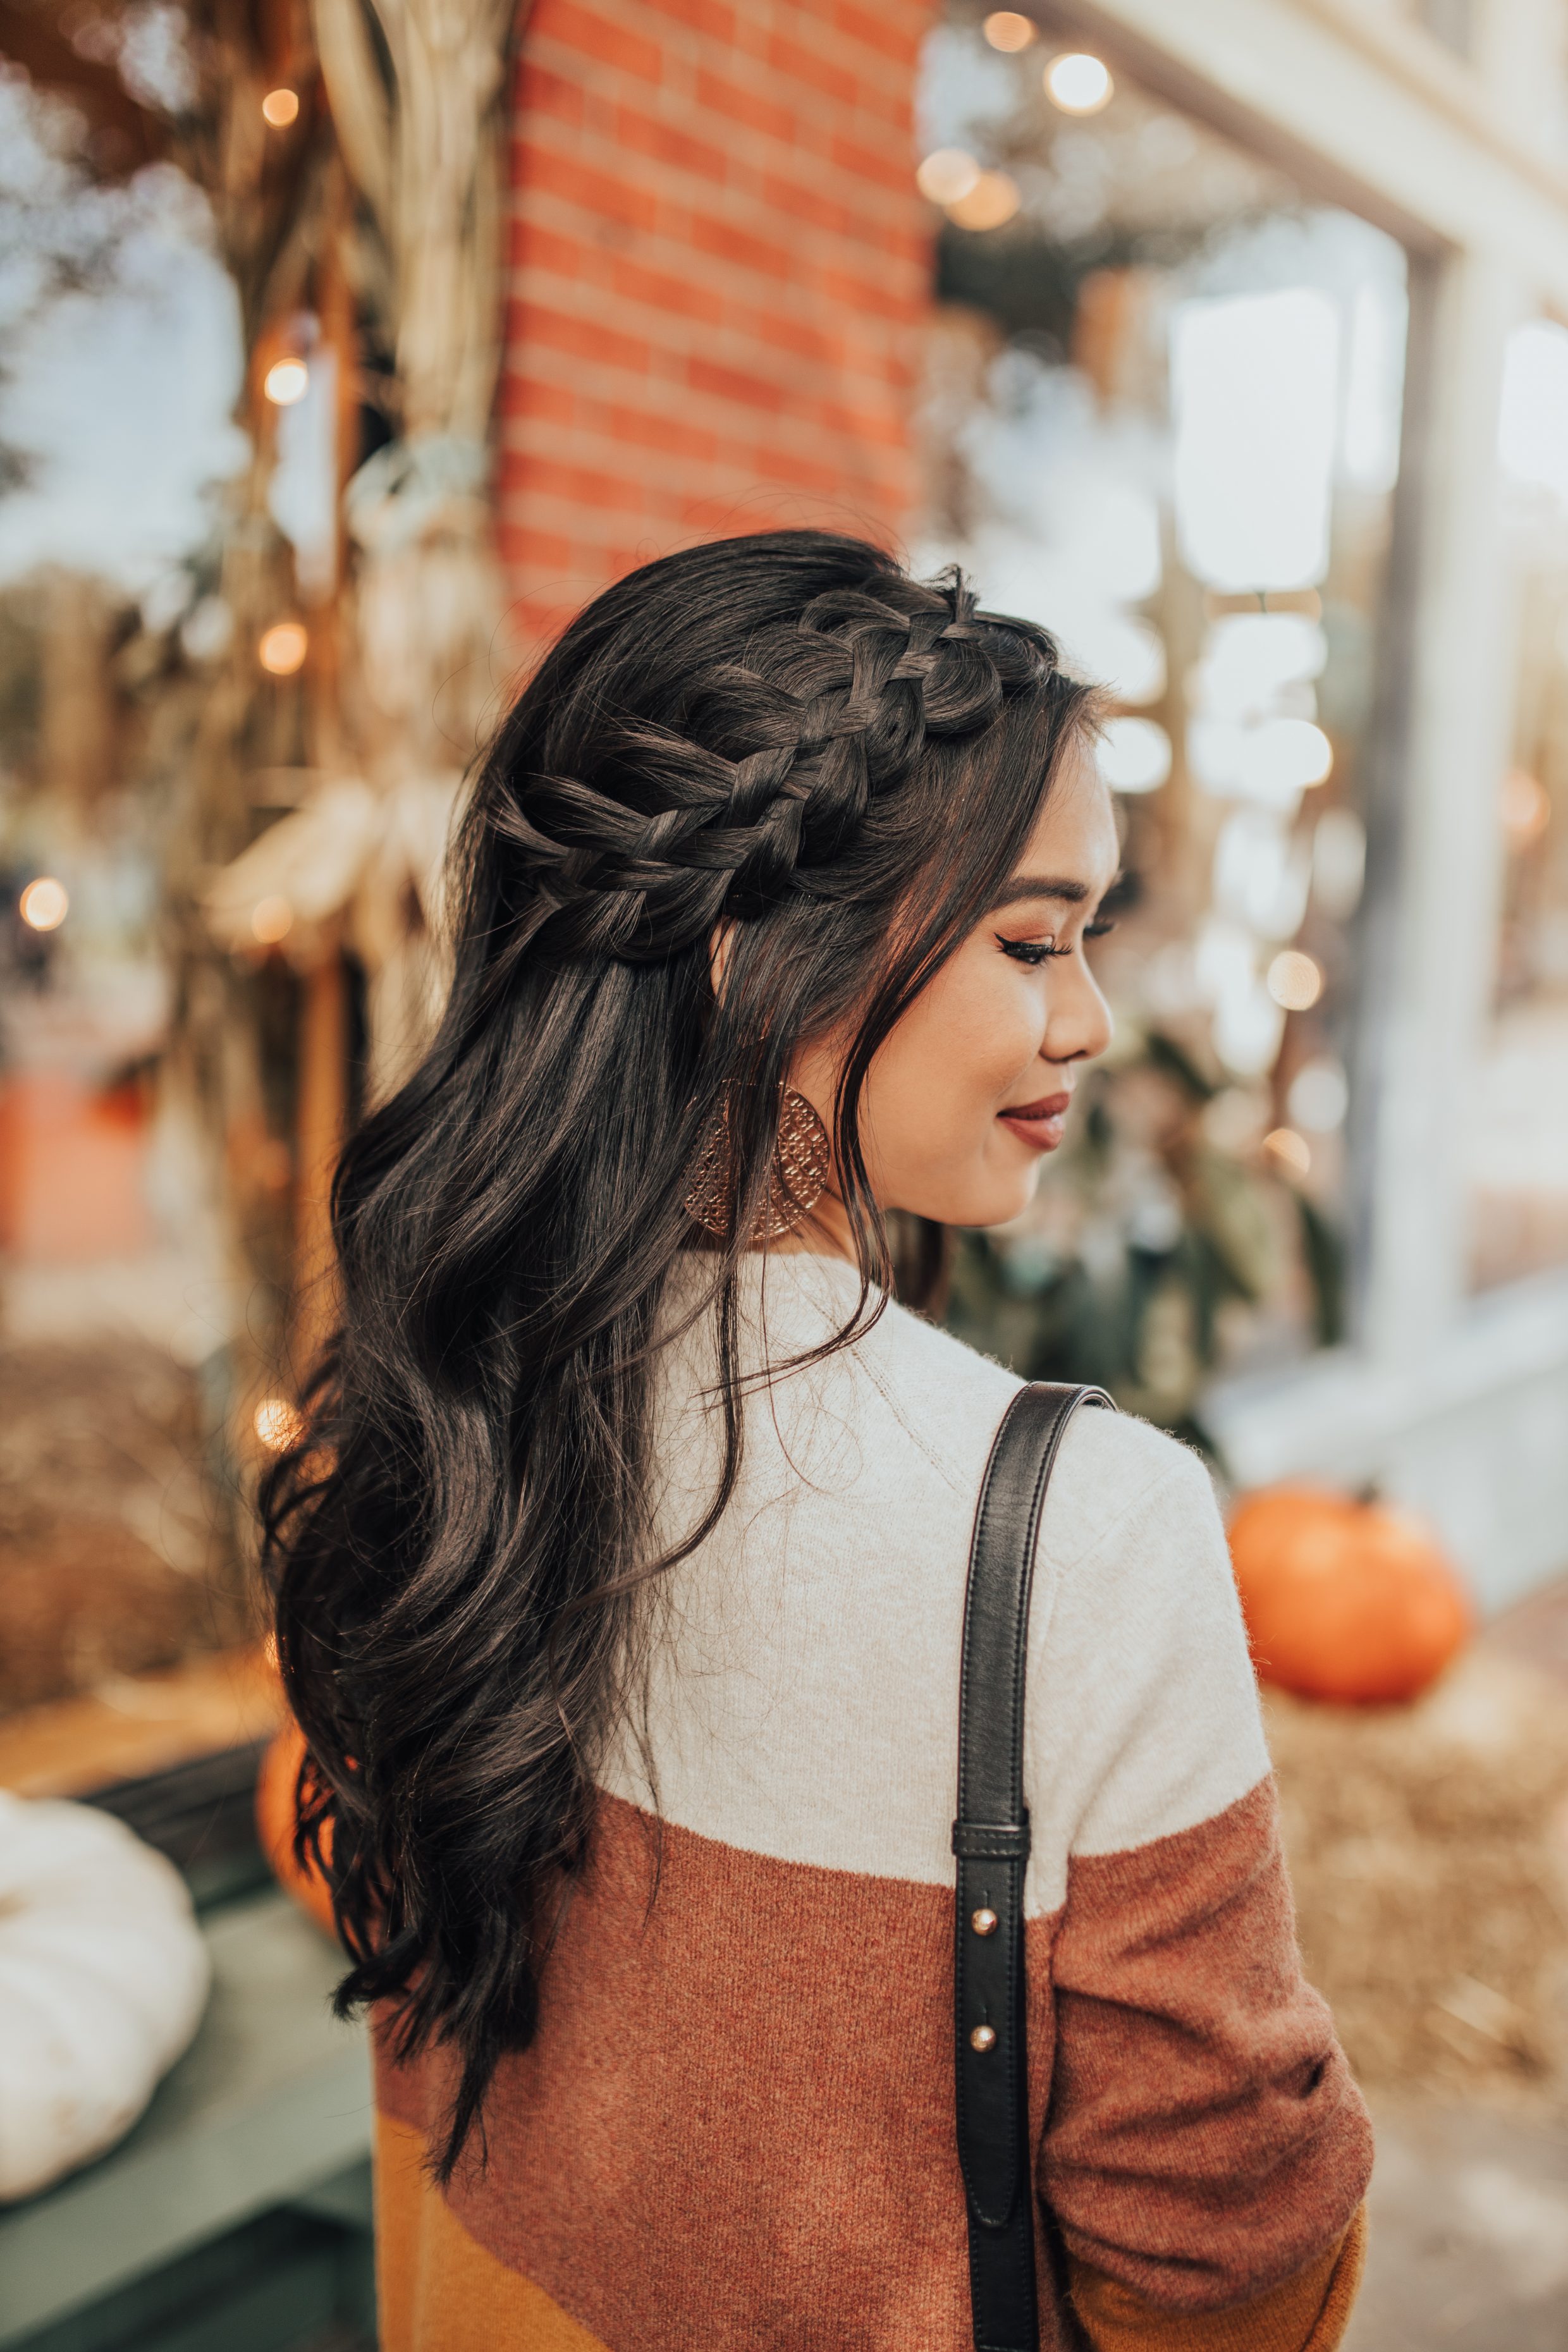 Striped cardigan and messy braids for fall on blogger Hoang-Kim